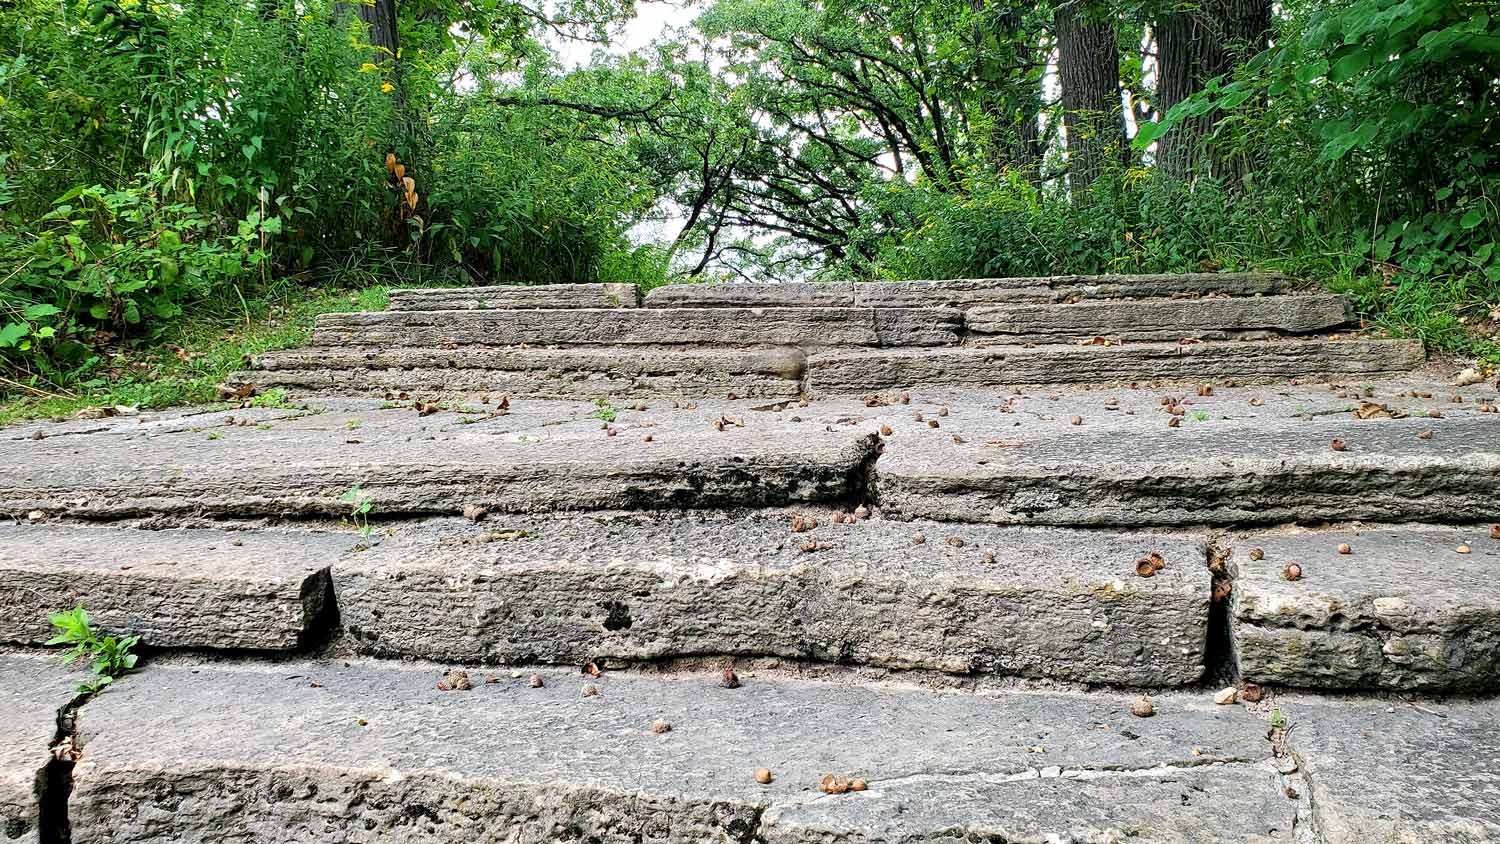 Close-up detail of the stone steps leading to the amphitheater at the Pleasant Valley Conservation Area.